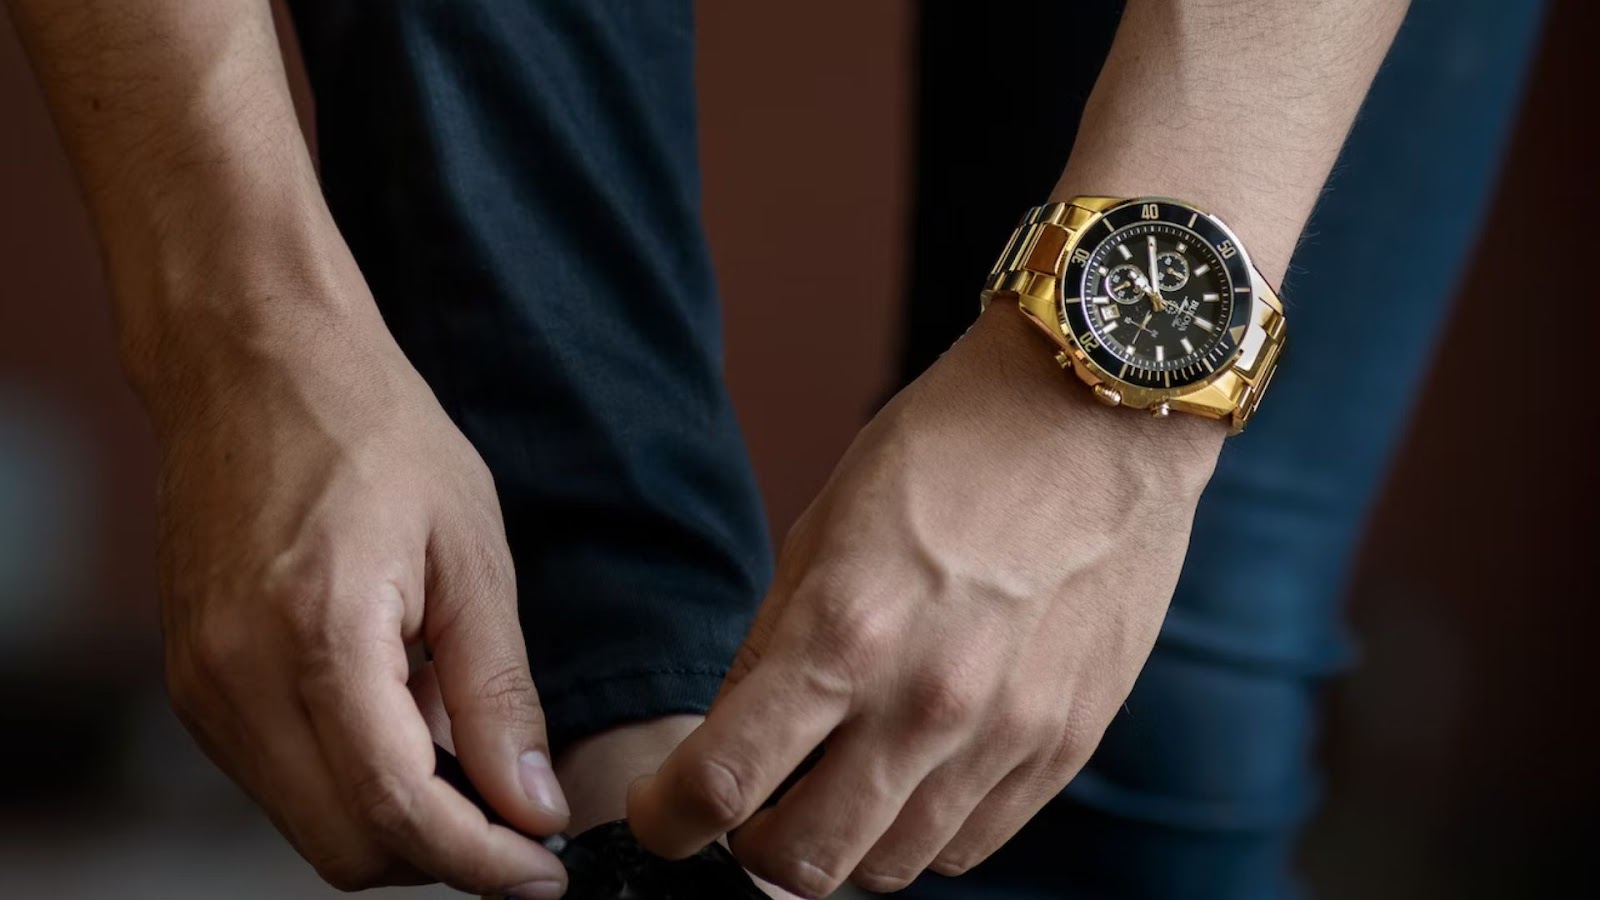 Is Invicta A Good Watch?